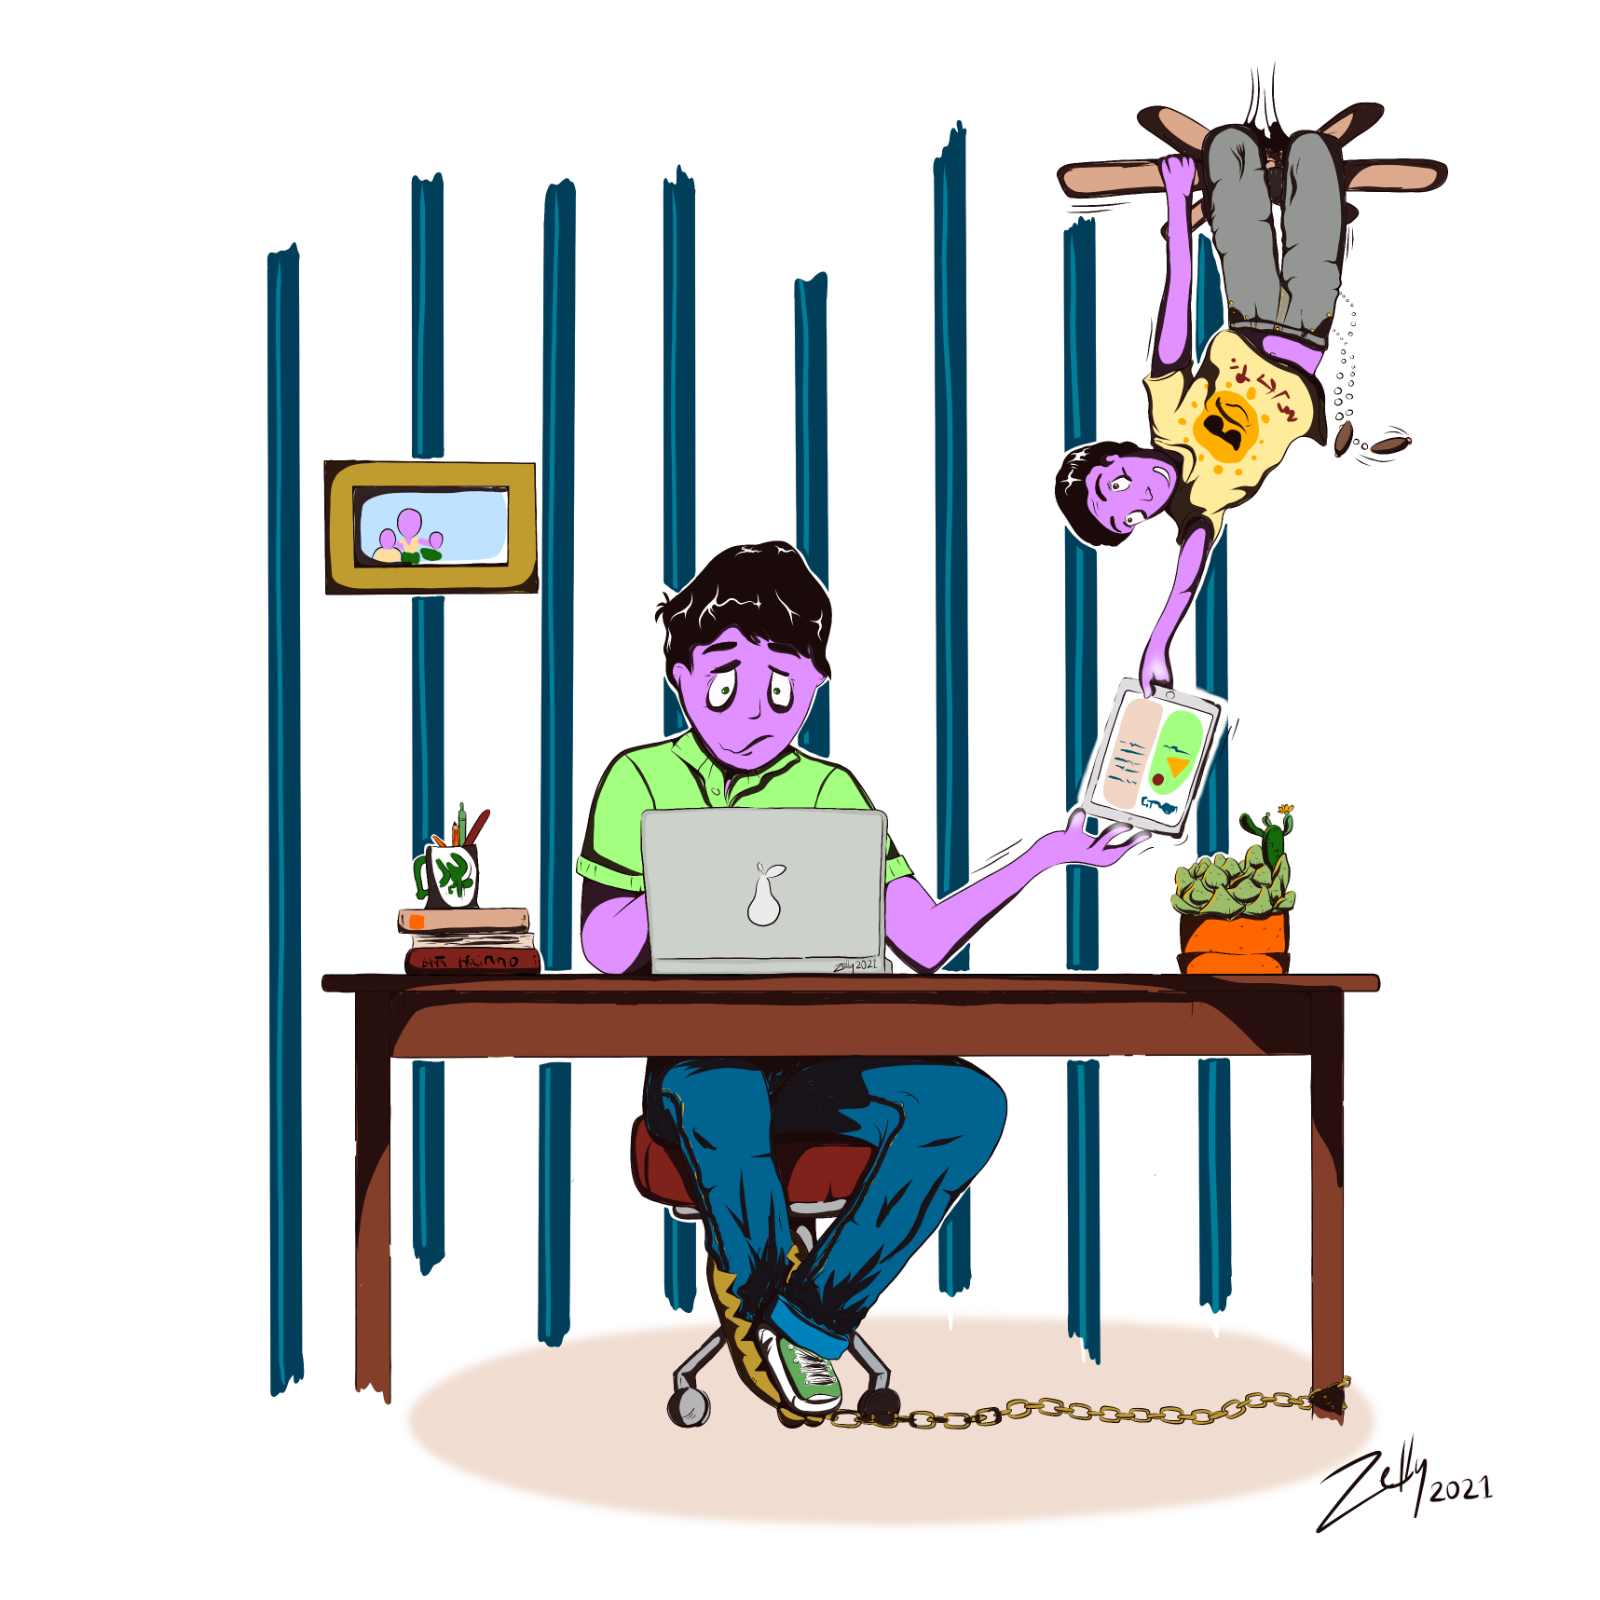 A scene of working from home during the pandemic. Stressed parent working at desk in home. Leg is chained to the desk. Child swings from ceiling fan looking at an iPad the parent is holding. The wall is jail cell bars.